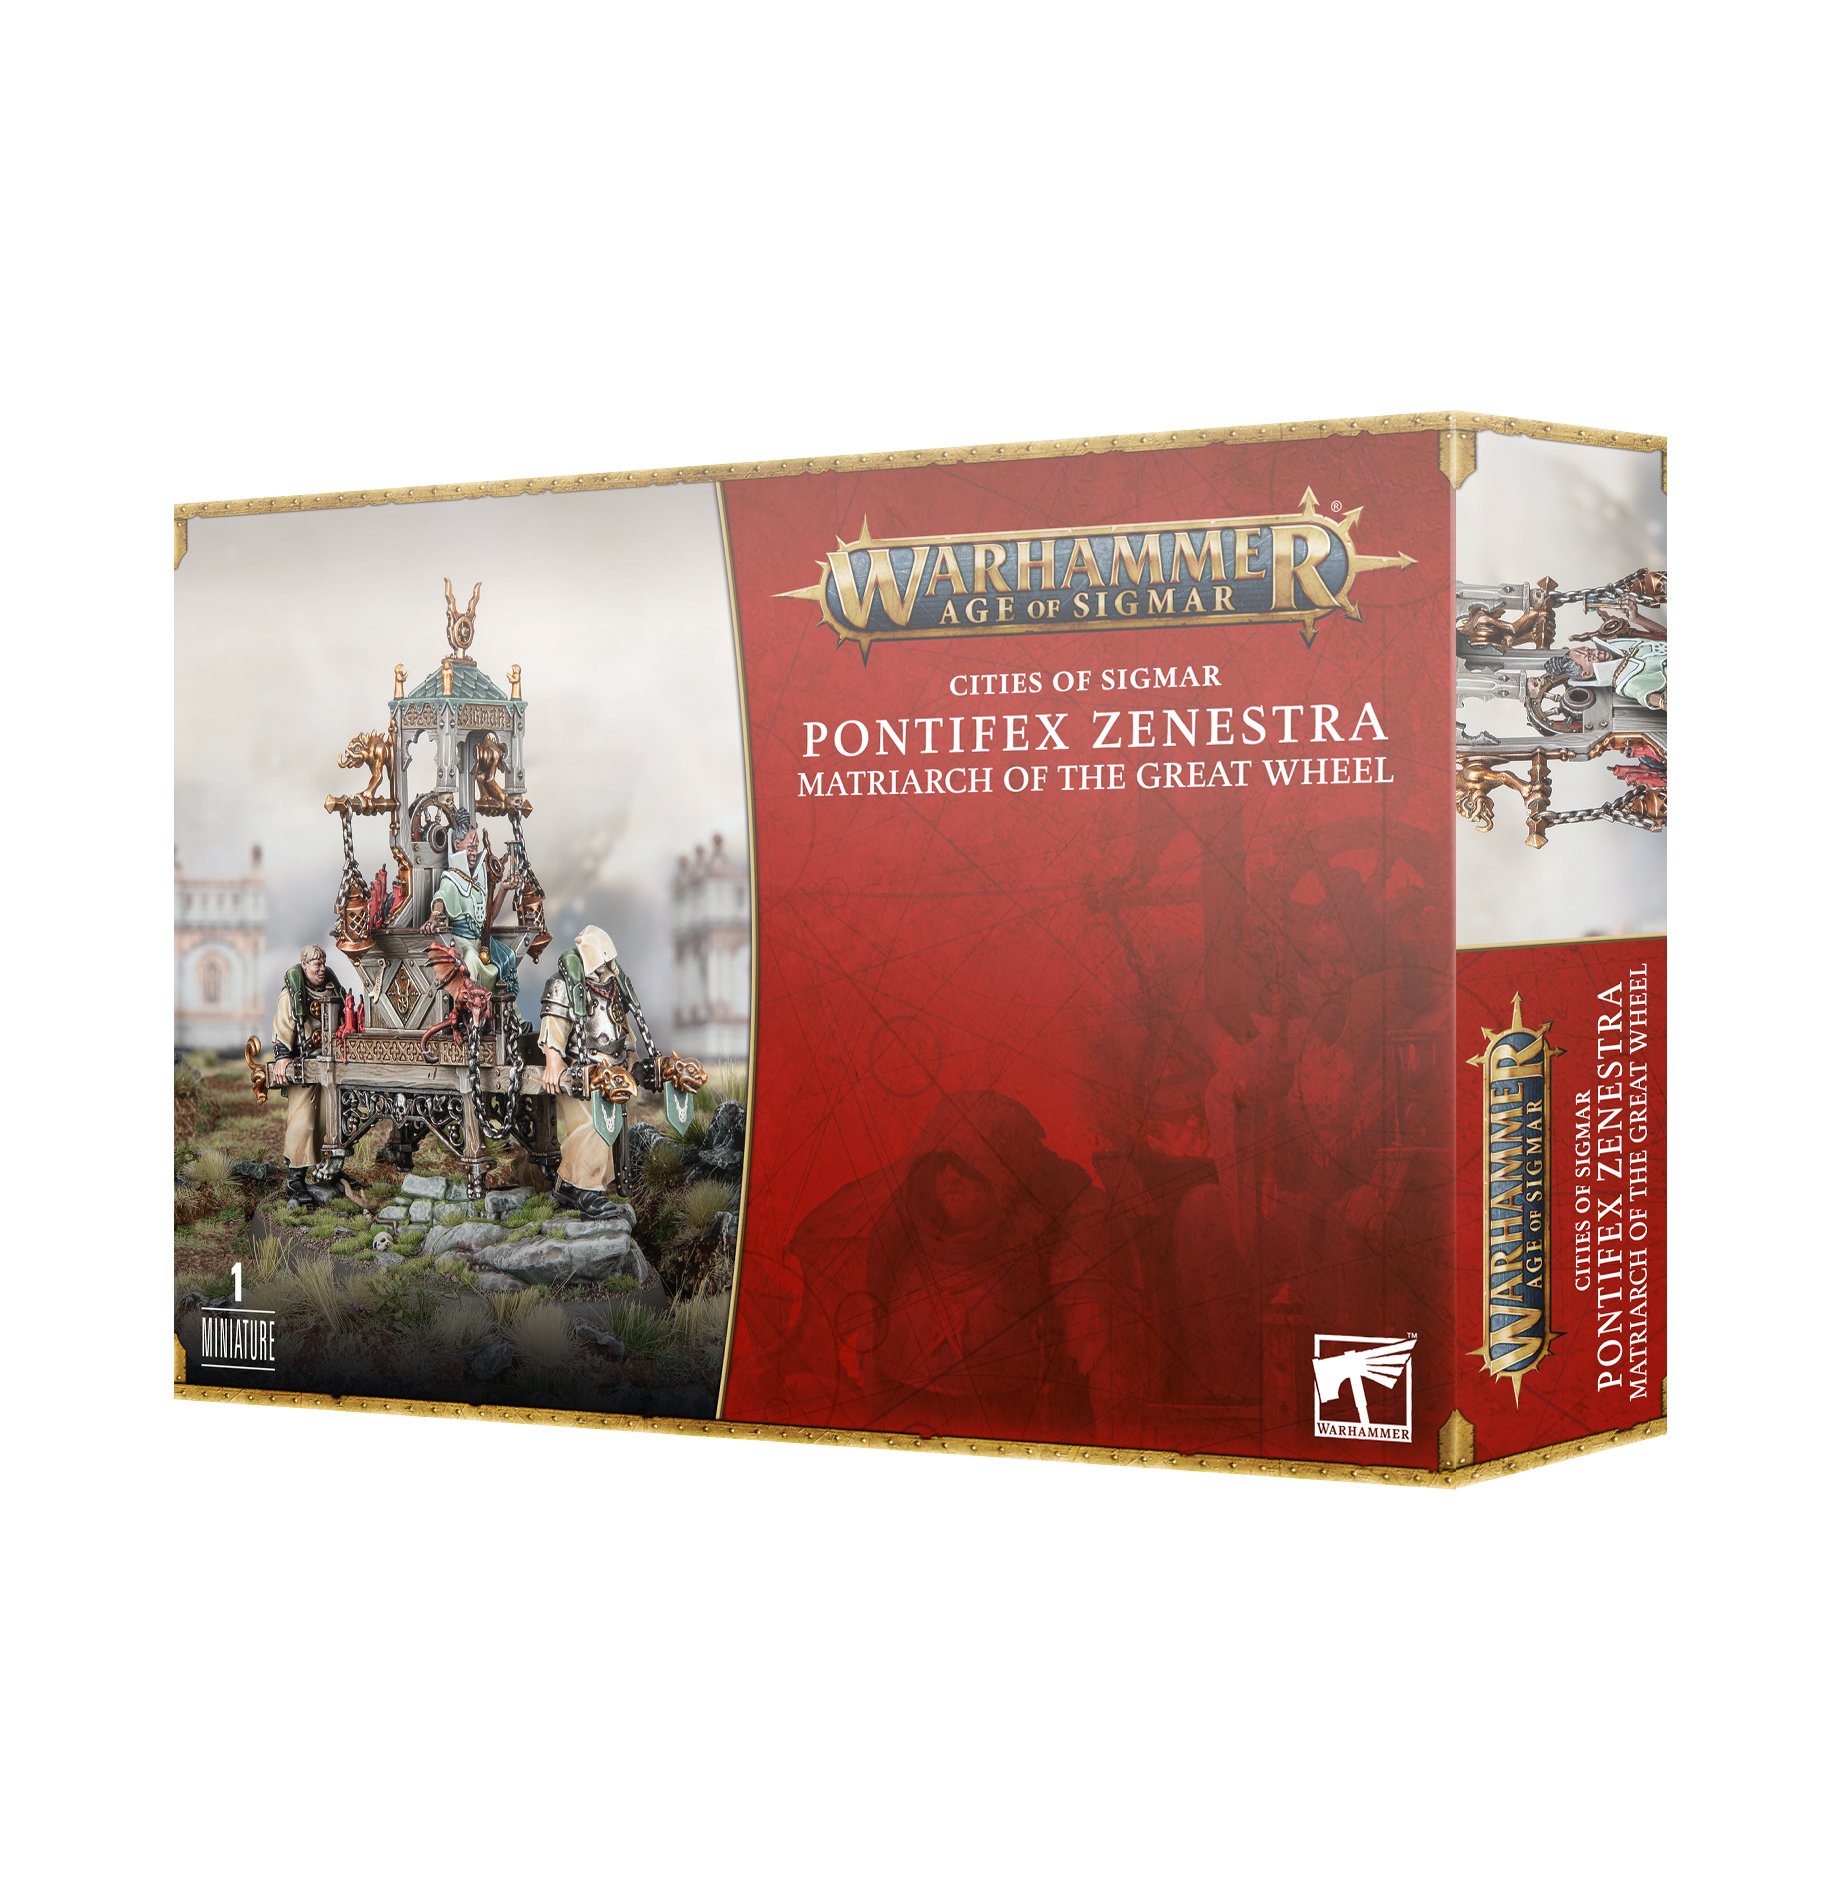 Warhammer Age of Sigmar: Cities of Sigmar: Pontifex Zenestra Matriarch of the Great Wheel 